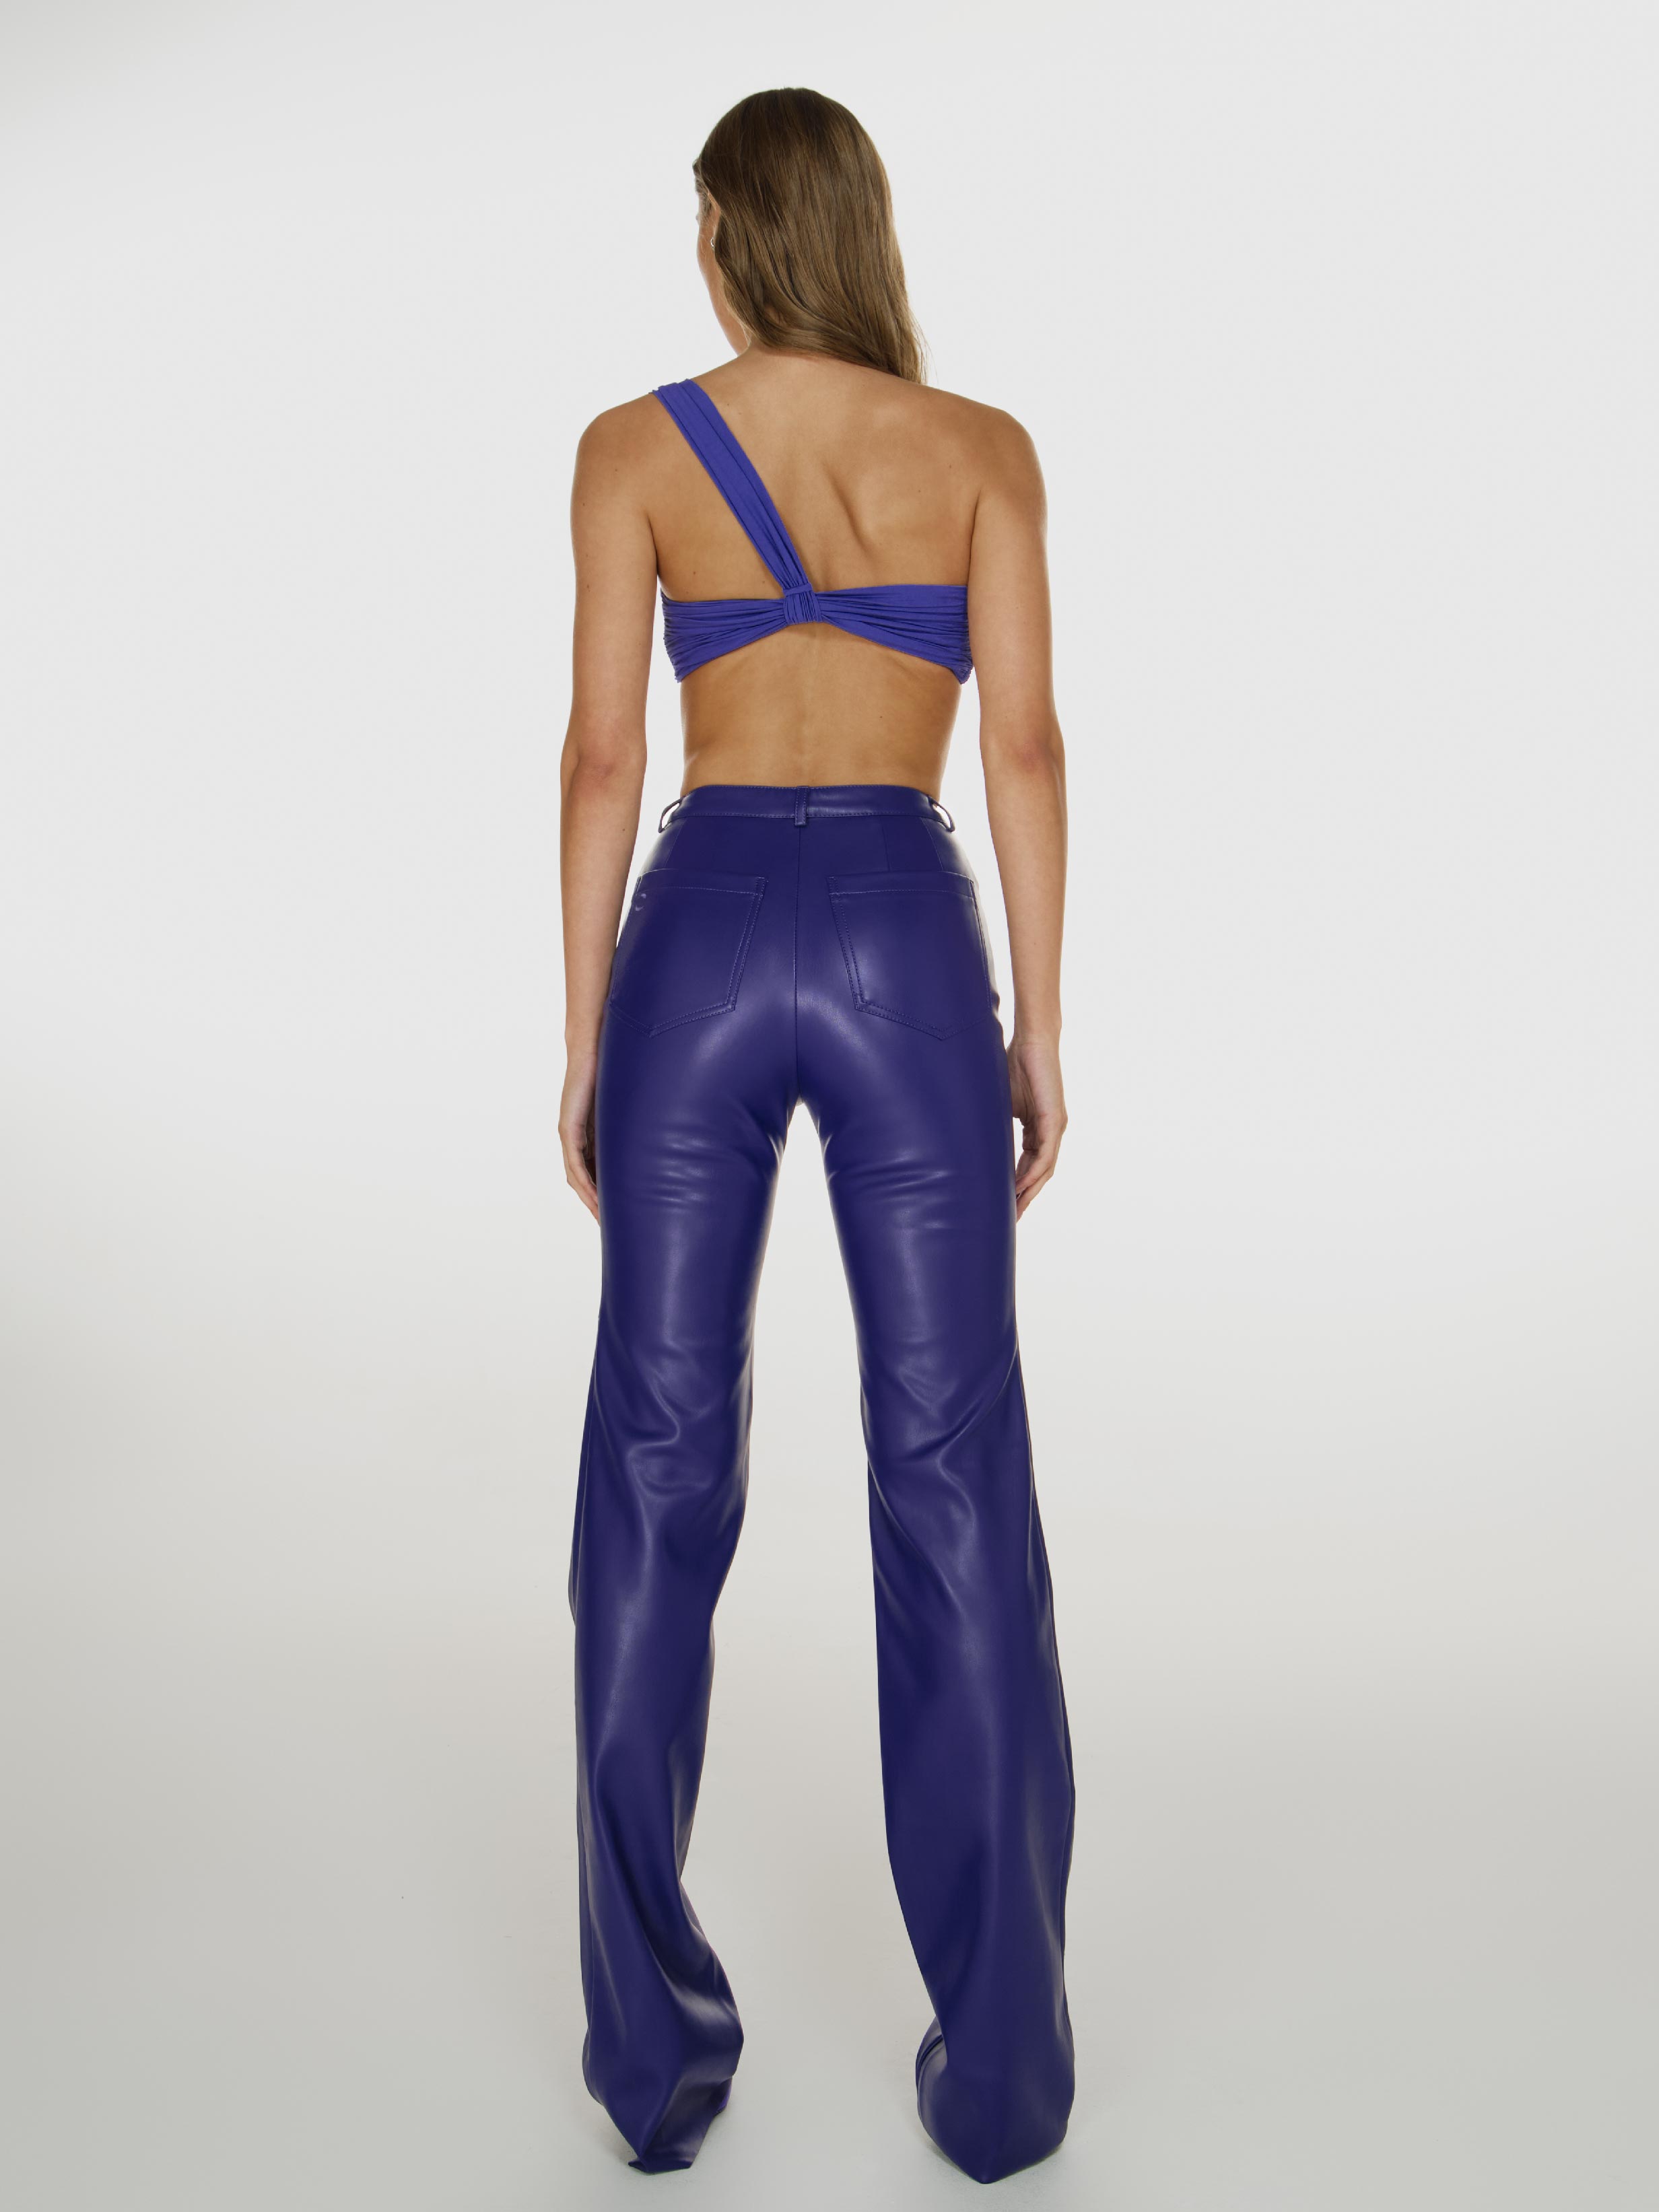 Full shot of a girl facing back in a purple one shoulder crop top and purple vegan leather pants with straight leg